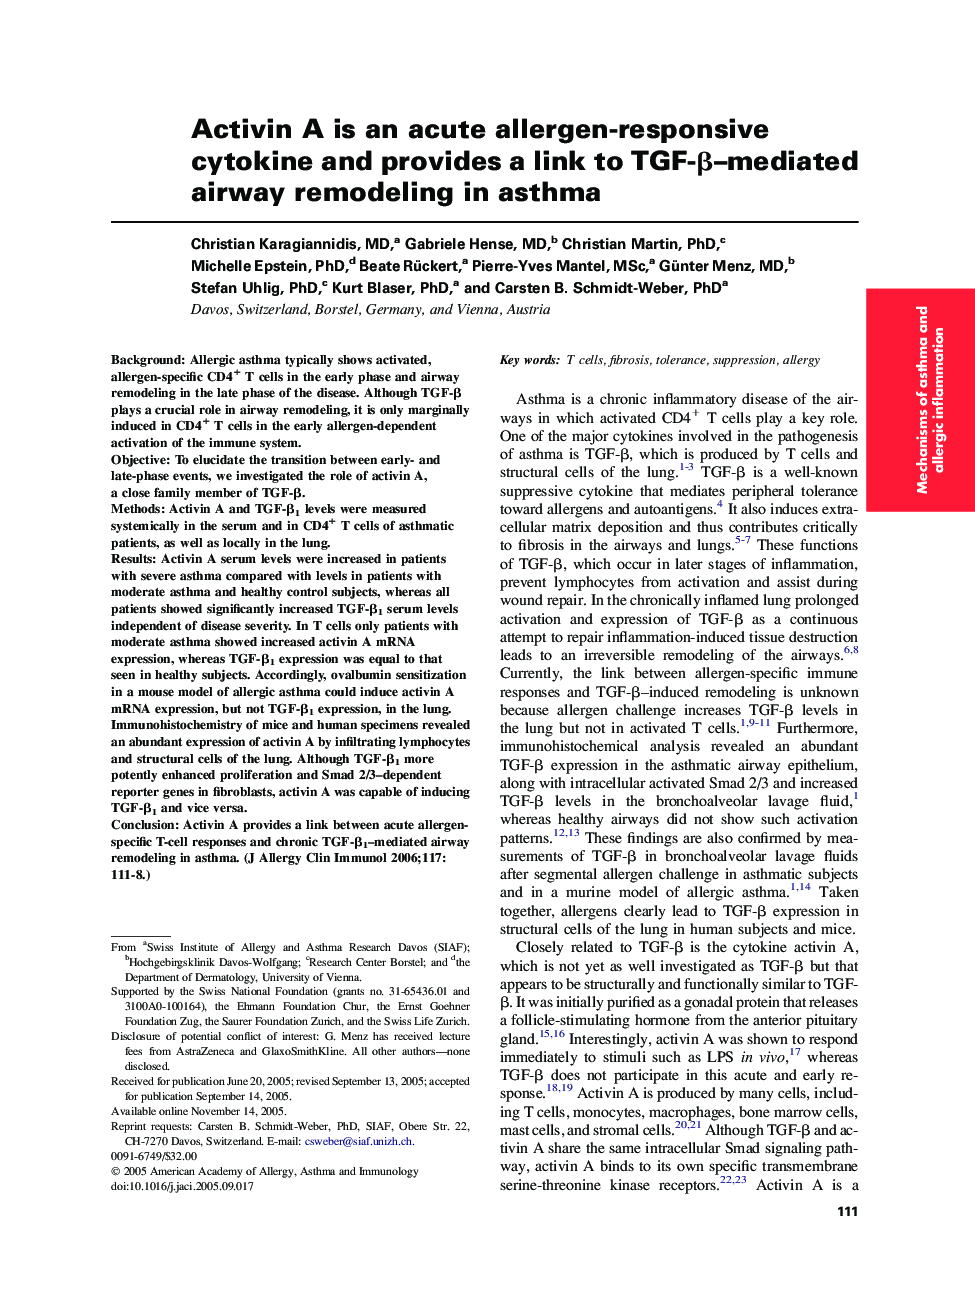 Activin A is an acute allergen-responsive cytokine and provides a link to TGF-β–mediated airway remodeling in asthma 